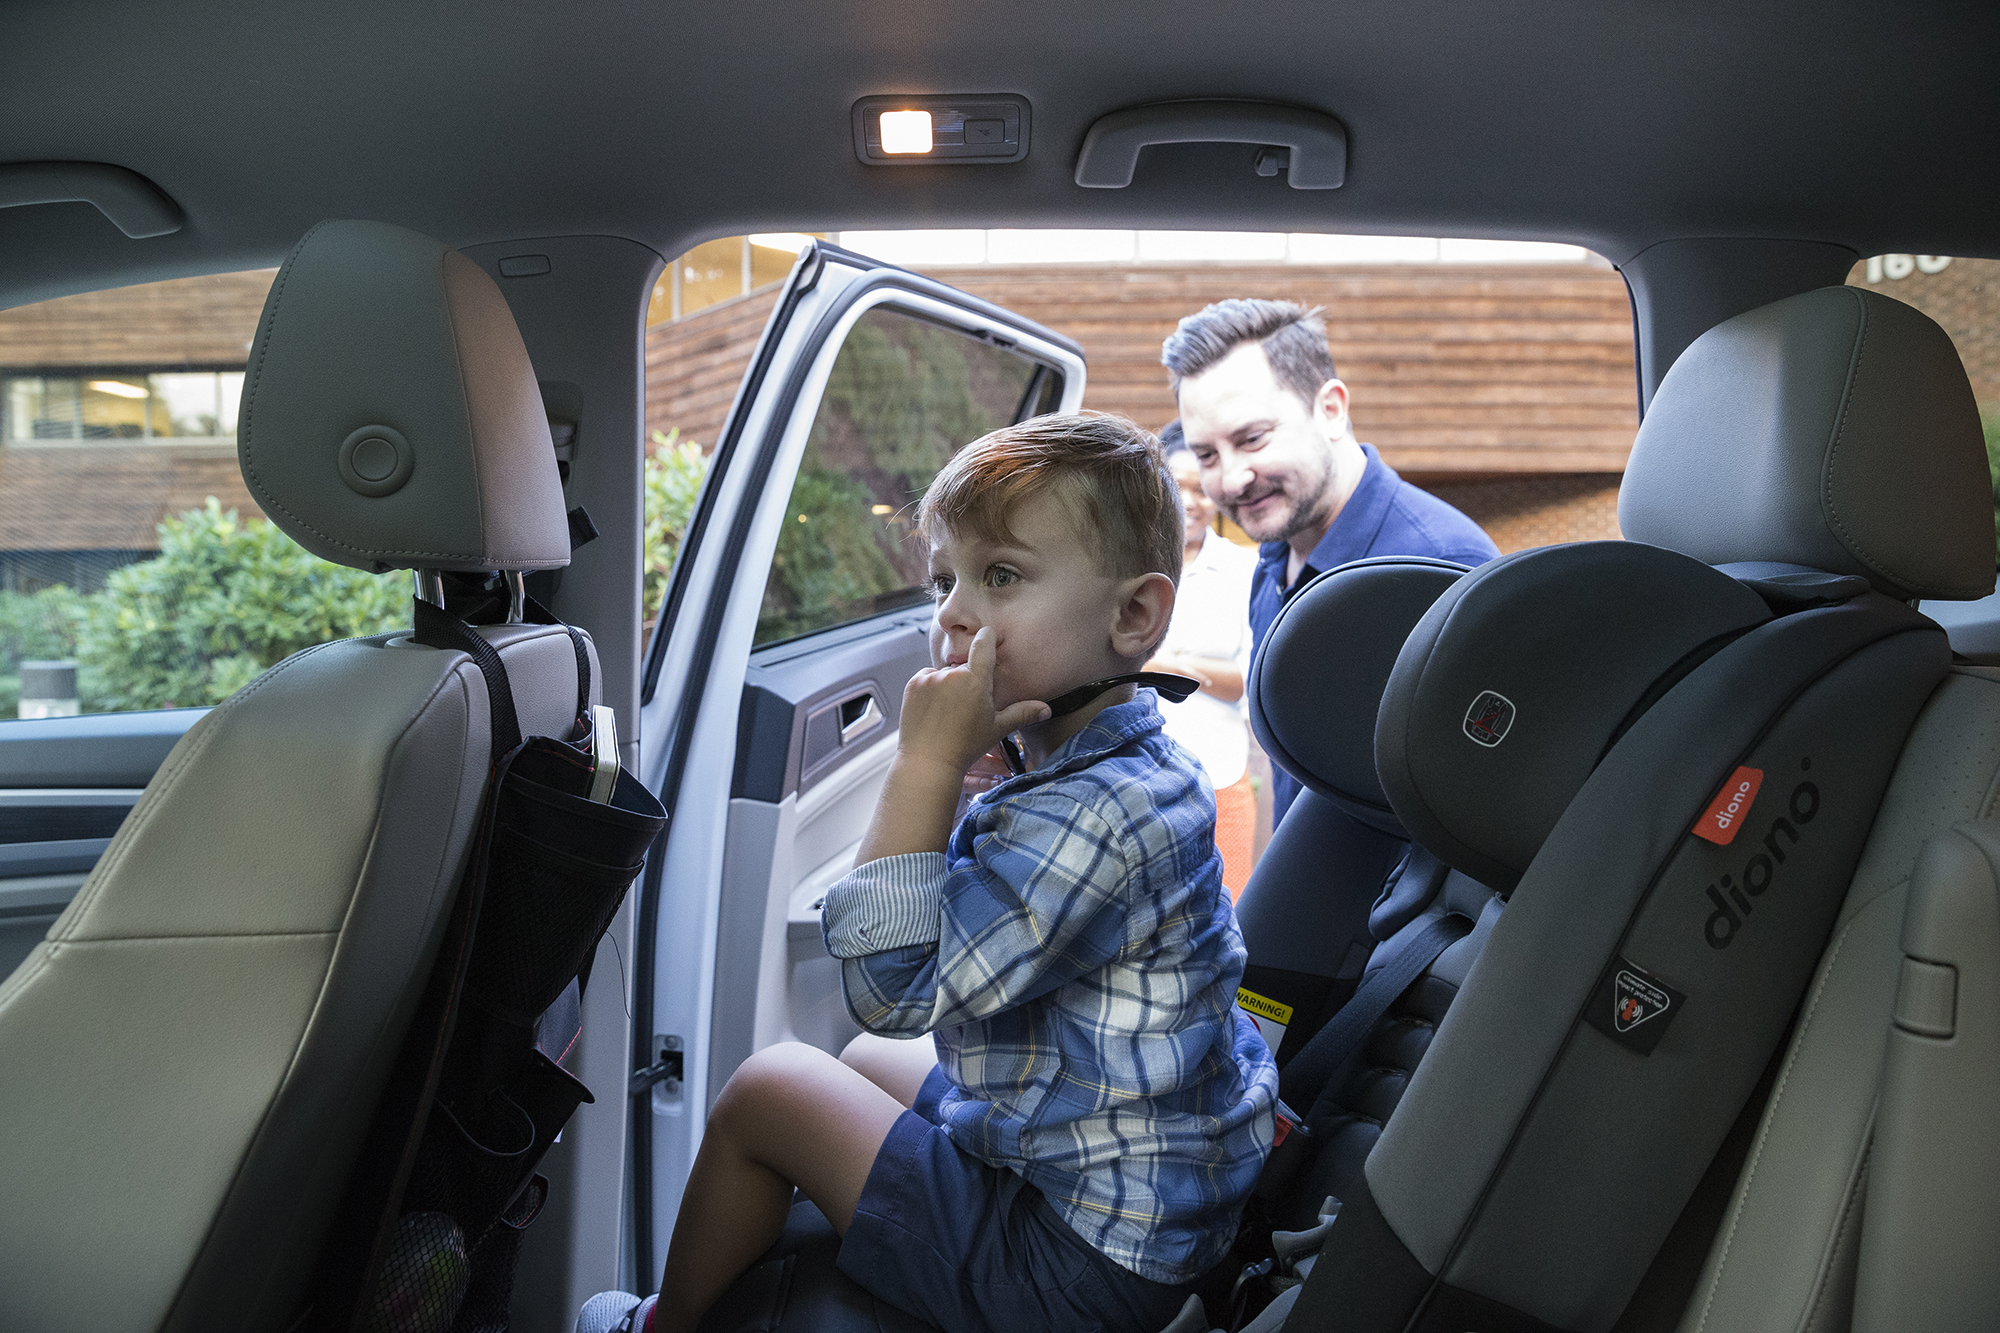 Photo: Owen is unbuckled from his car seat, sitting in the car and looking around. His father stands outside the car, waiting for Owen to climb out.